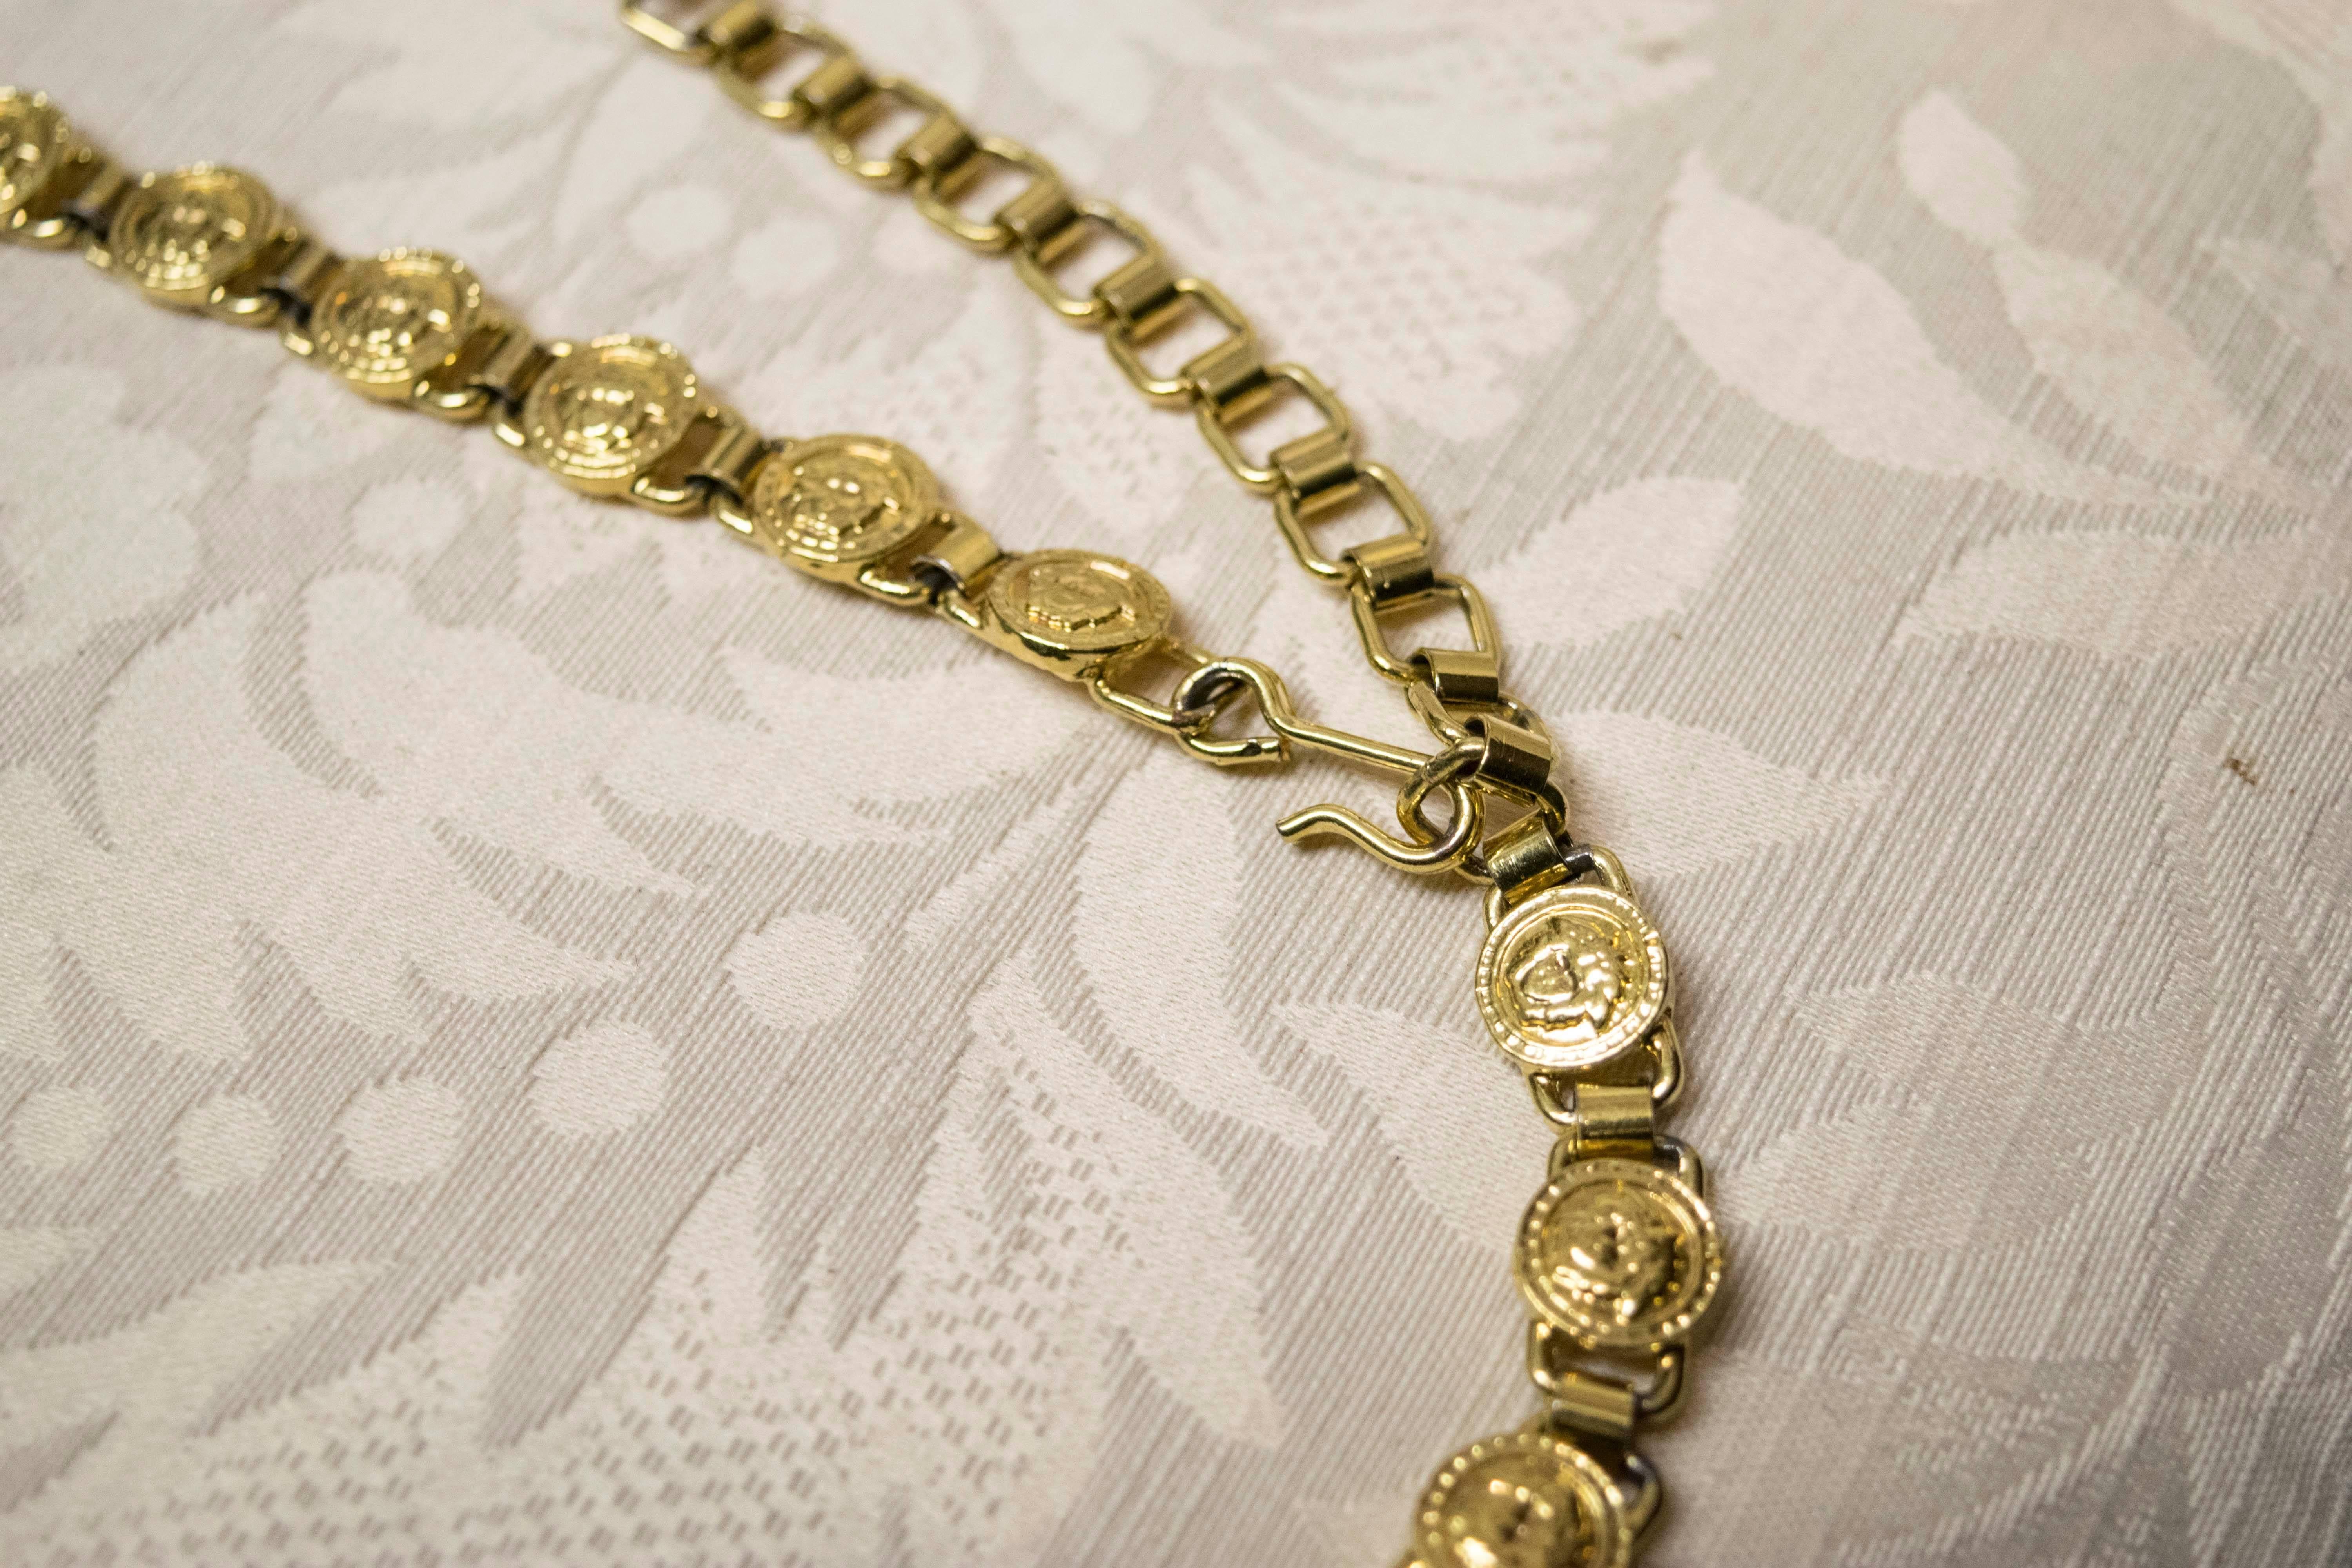 Gianni Versace chain belt. 

A great statement Gianni Versace chain belt, would be great over a dress or jeans. The piece is stamped. 

Extends 29 inches to 32 inches. 